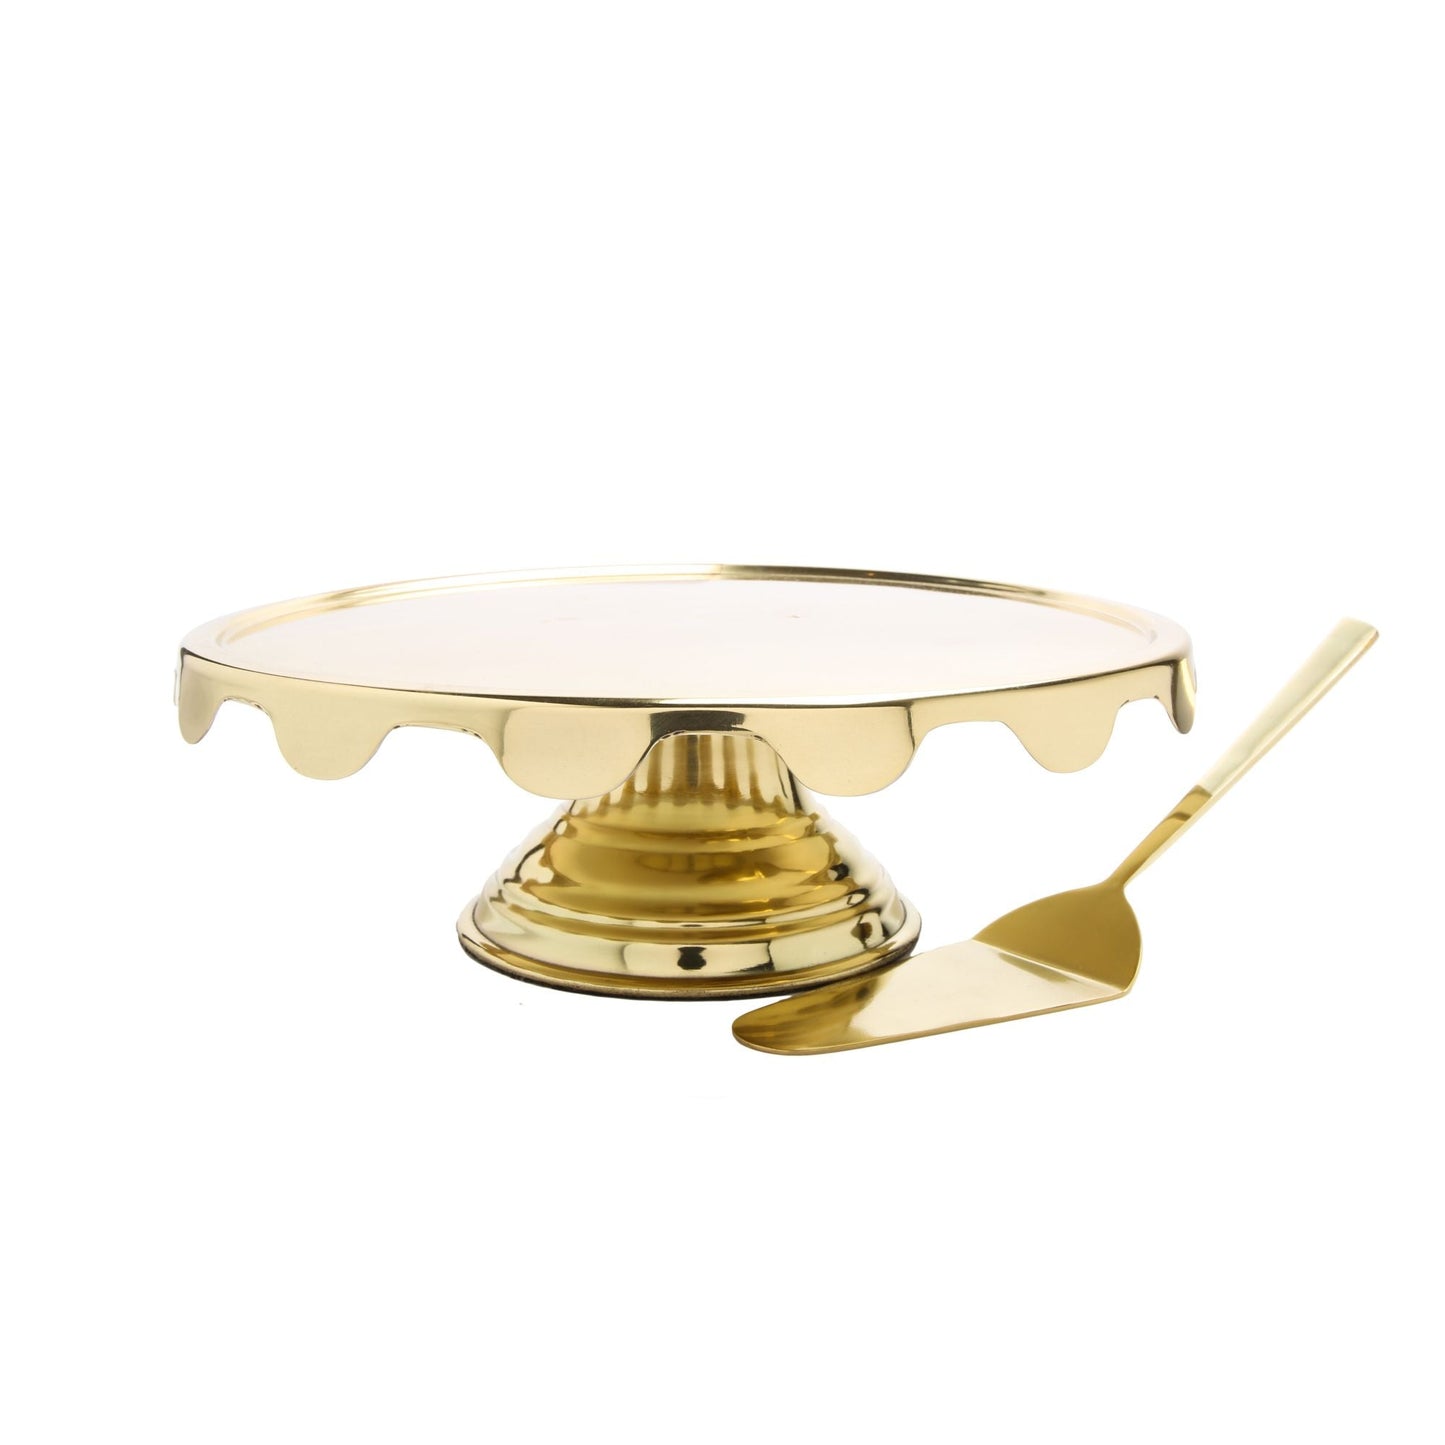 Classic Touch Stainless Steel Cake Stand With Server, Gold, 13.75"